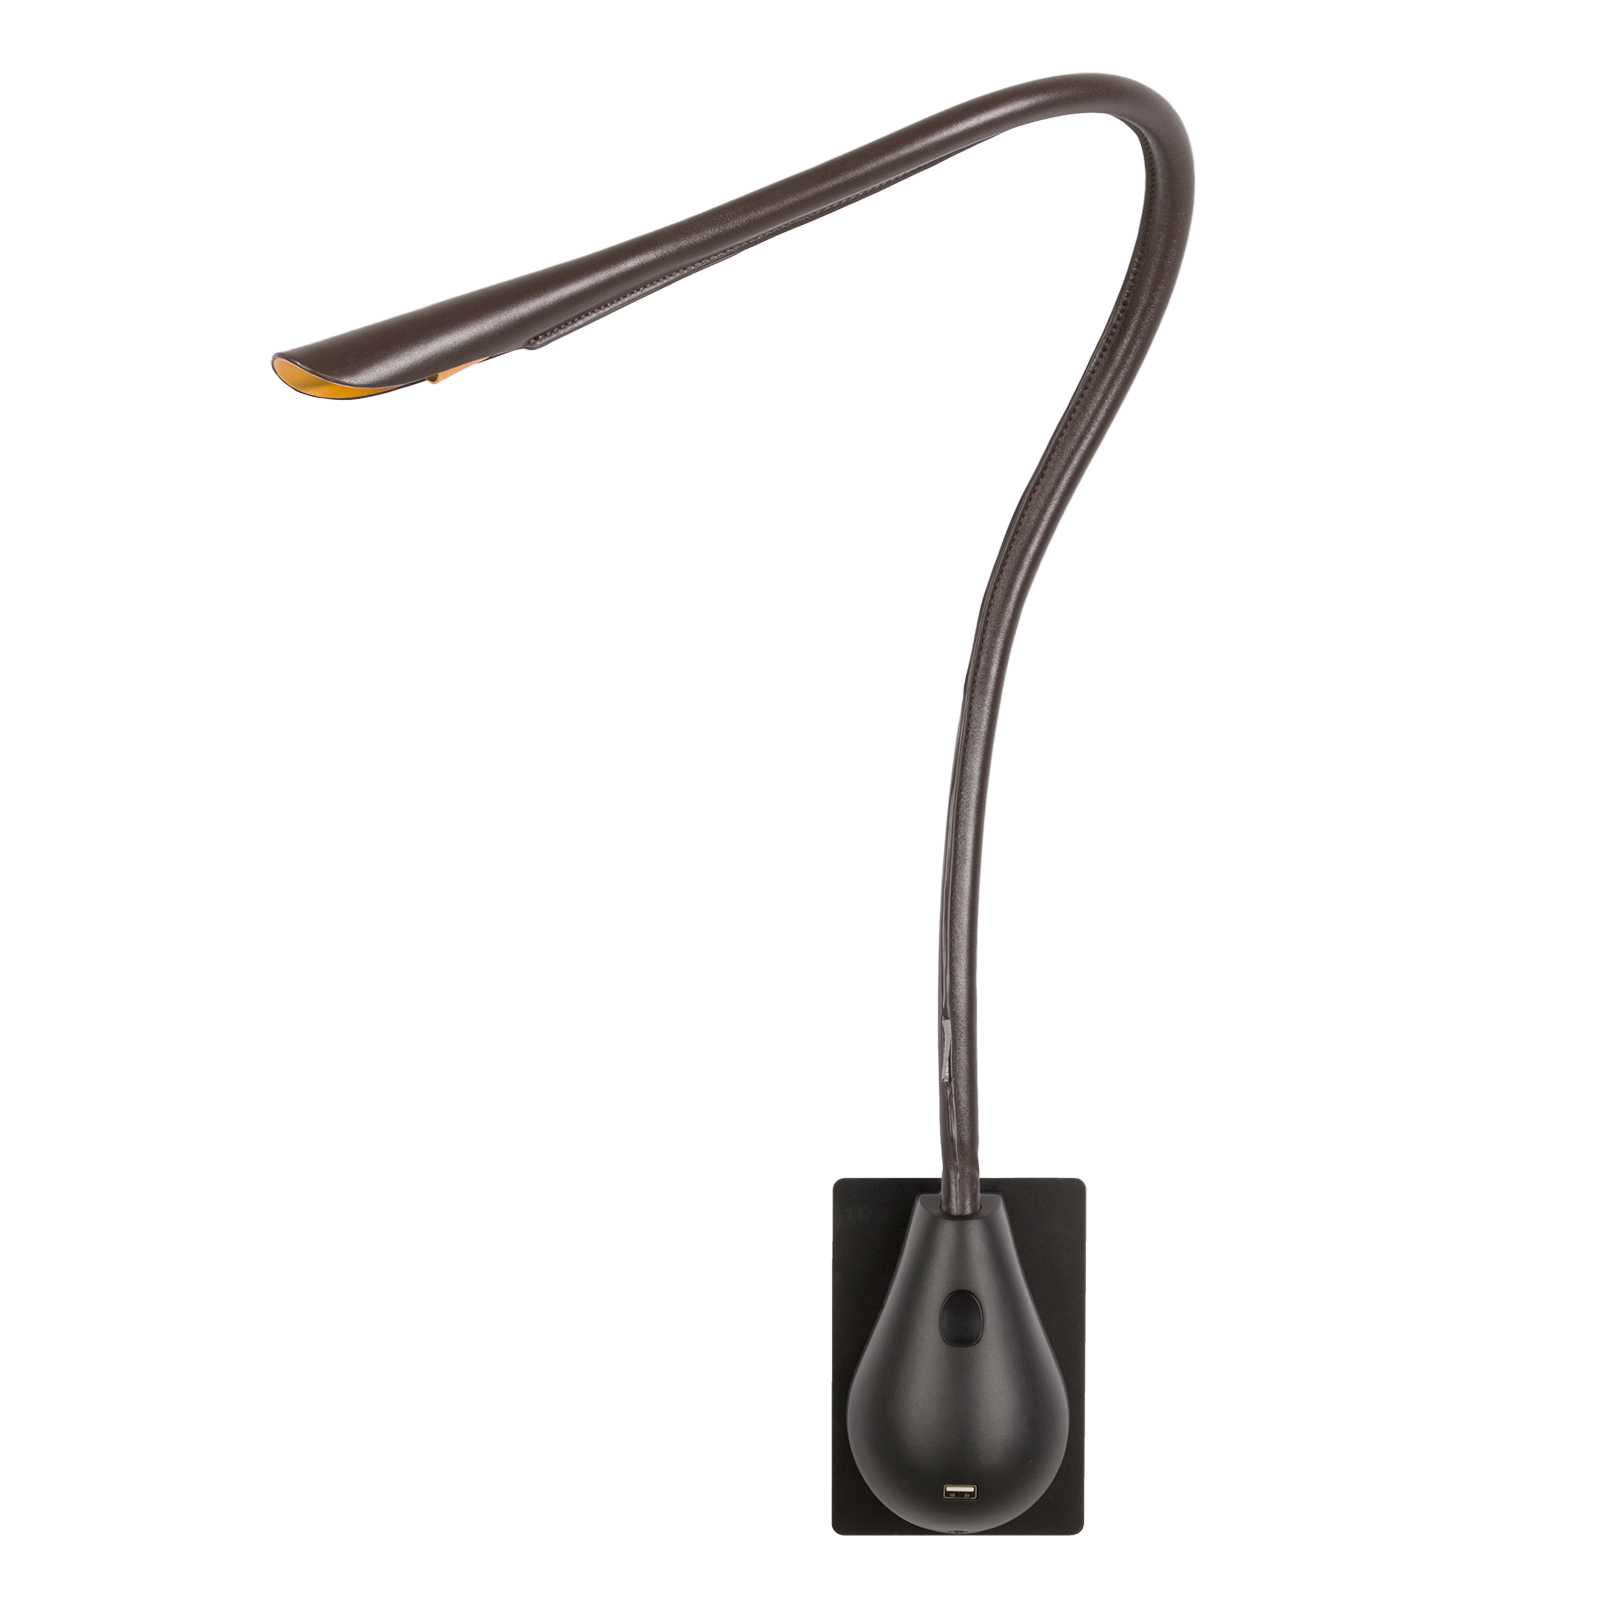 Cobra 90 Leather Wall Sconce By Innermost Wc078390 10 Inn363861